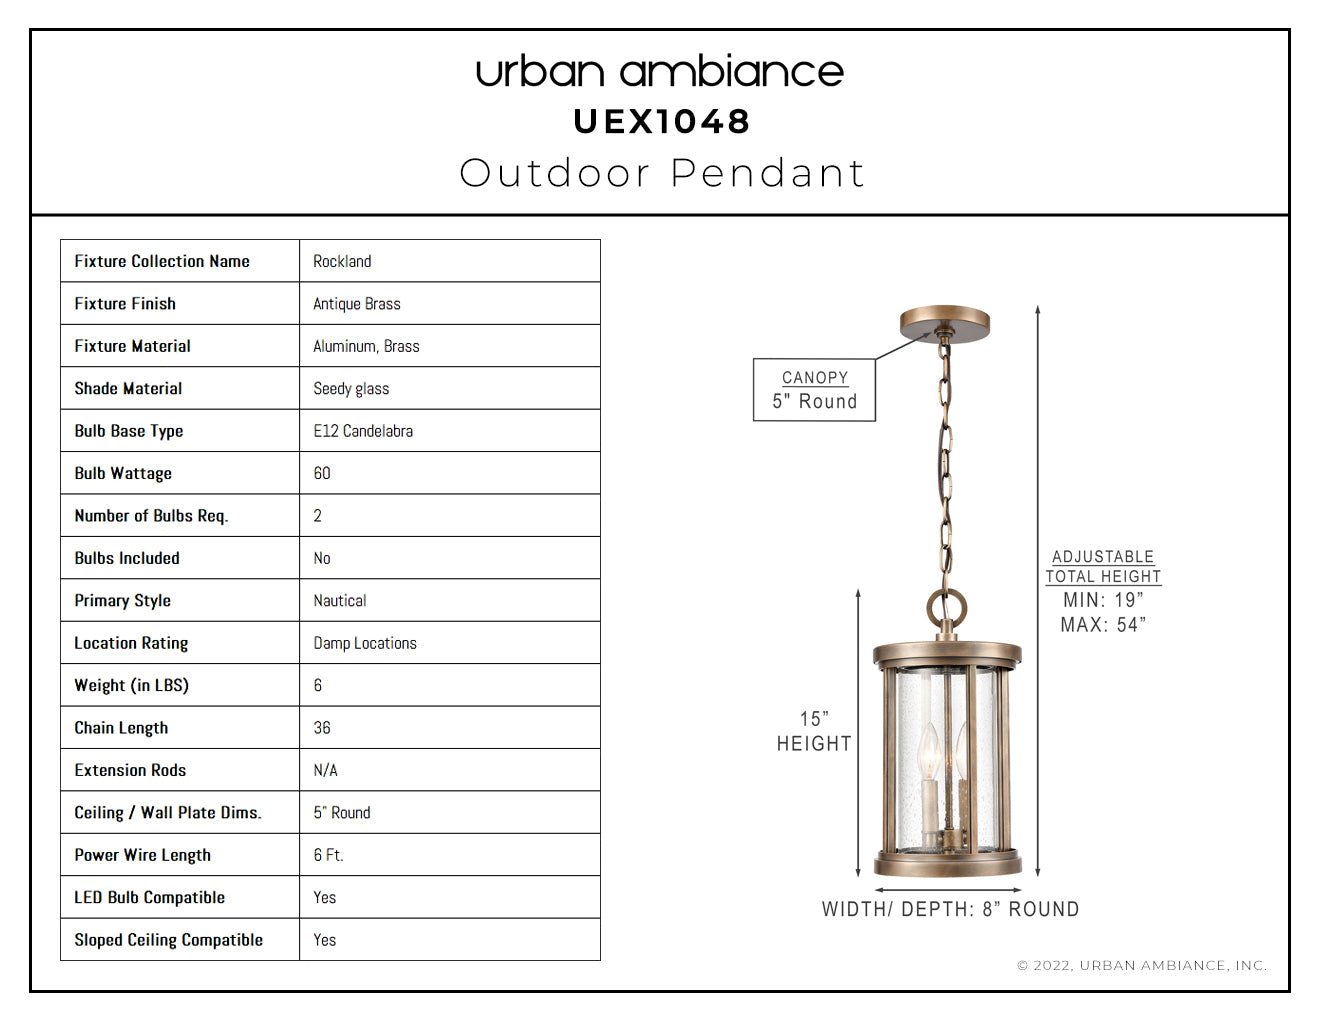 UEX1048 Nautical Outdoor Pendant 15''H x 8''W, Antique Brass Finish,  Rockland Collection